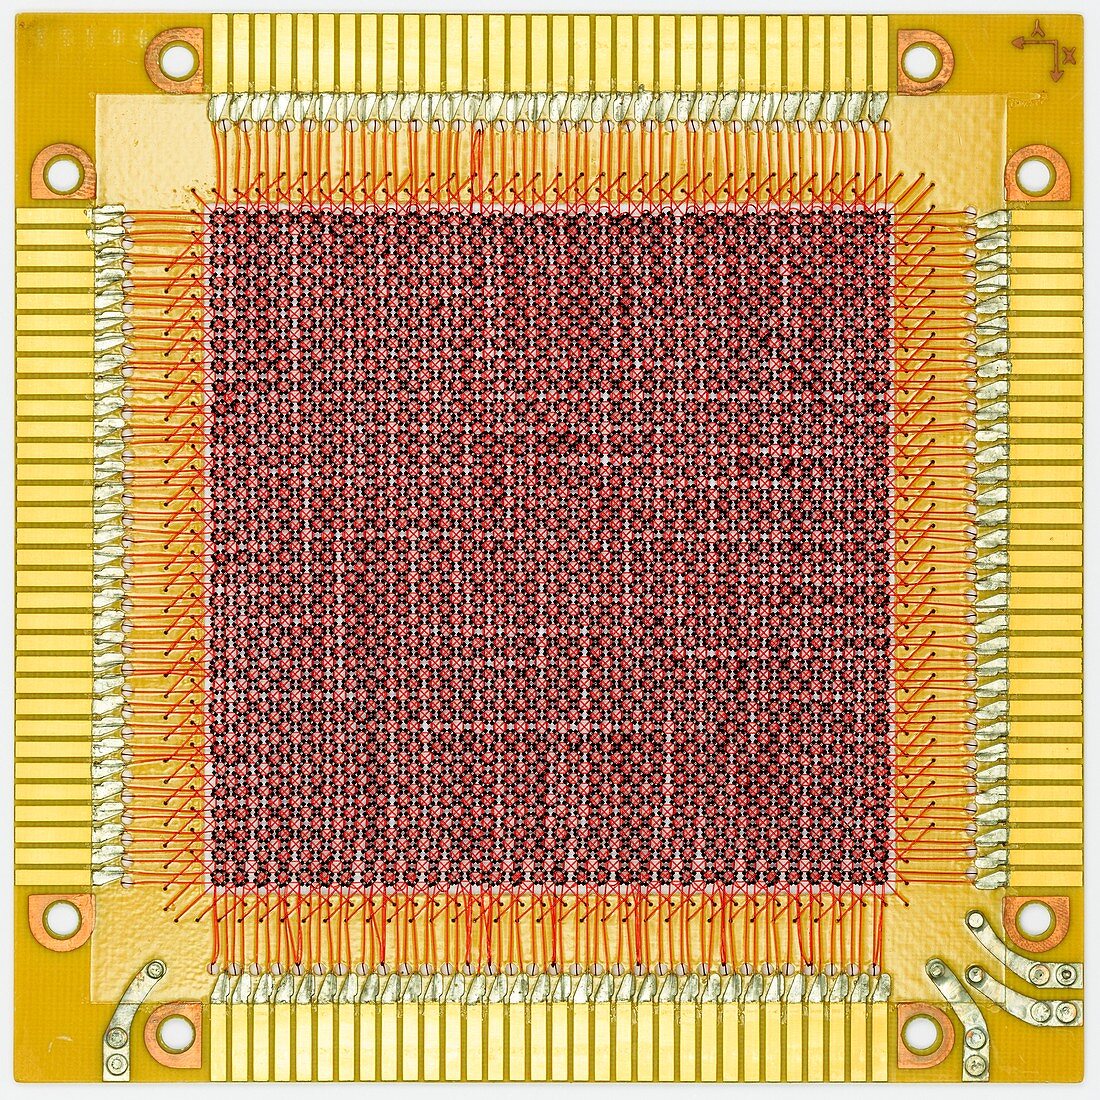 Magnetic-core memory of Univac Computer